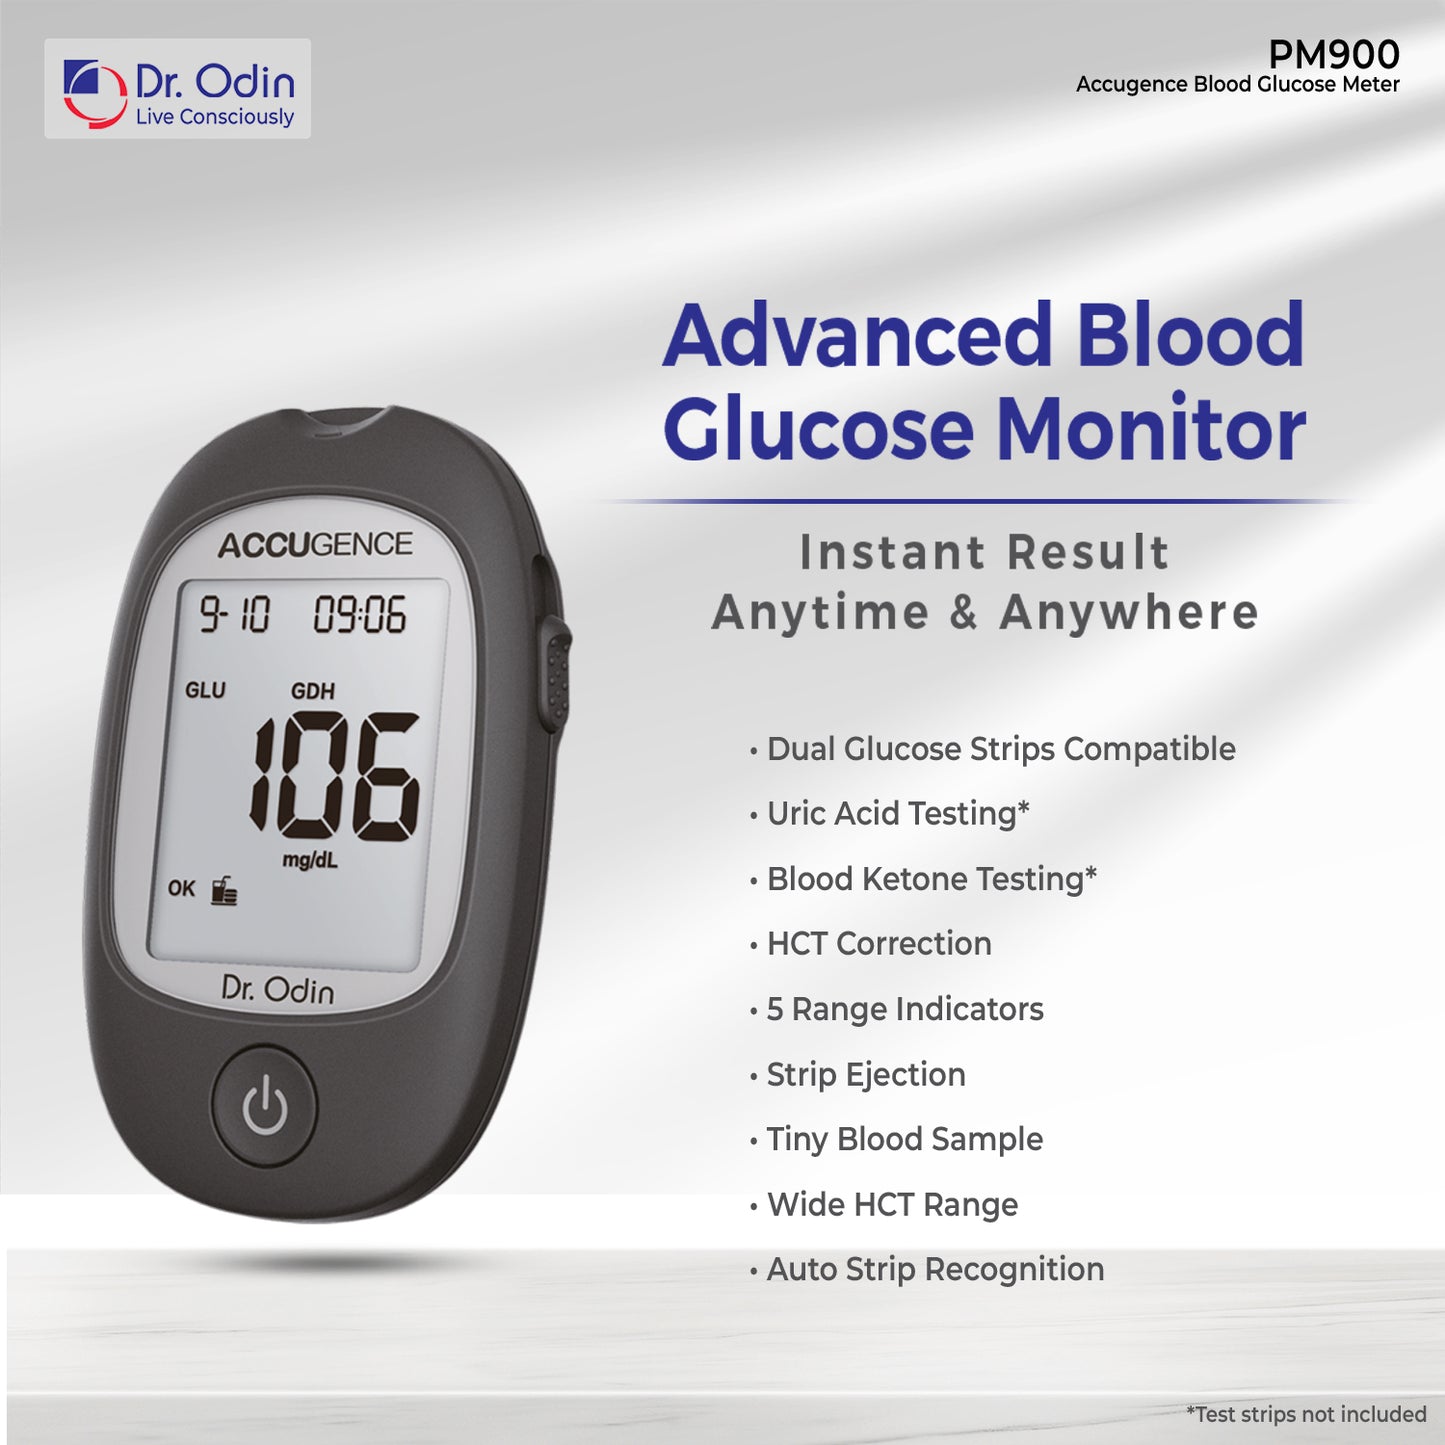 Accugence Blood Glucose Meter FAD-GDH Kit - PM900